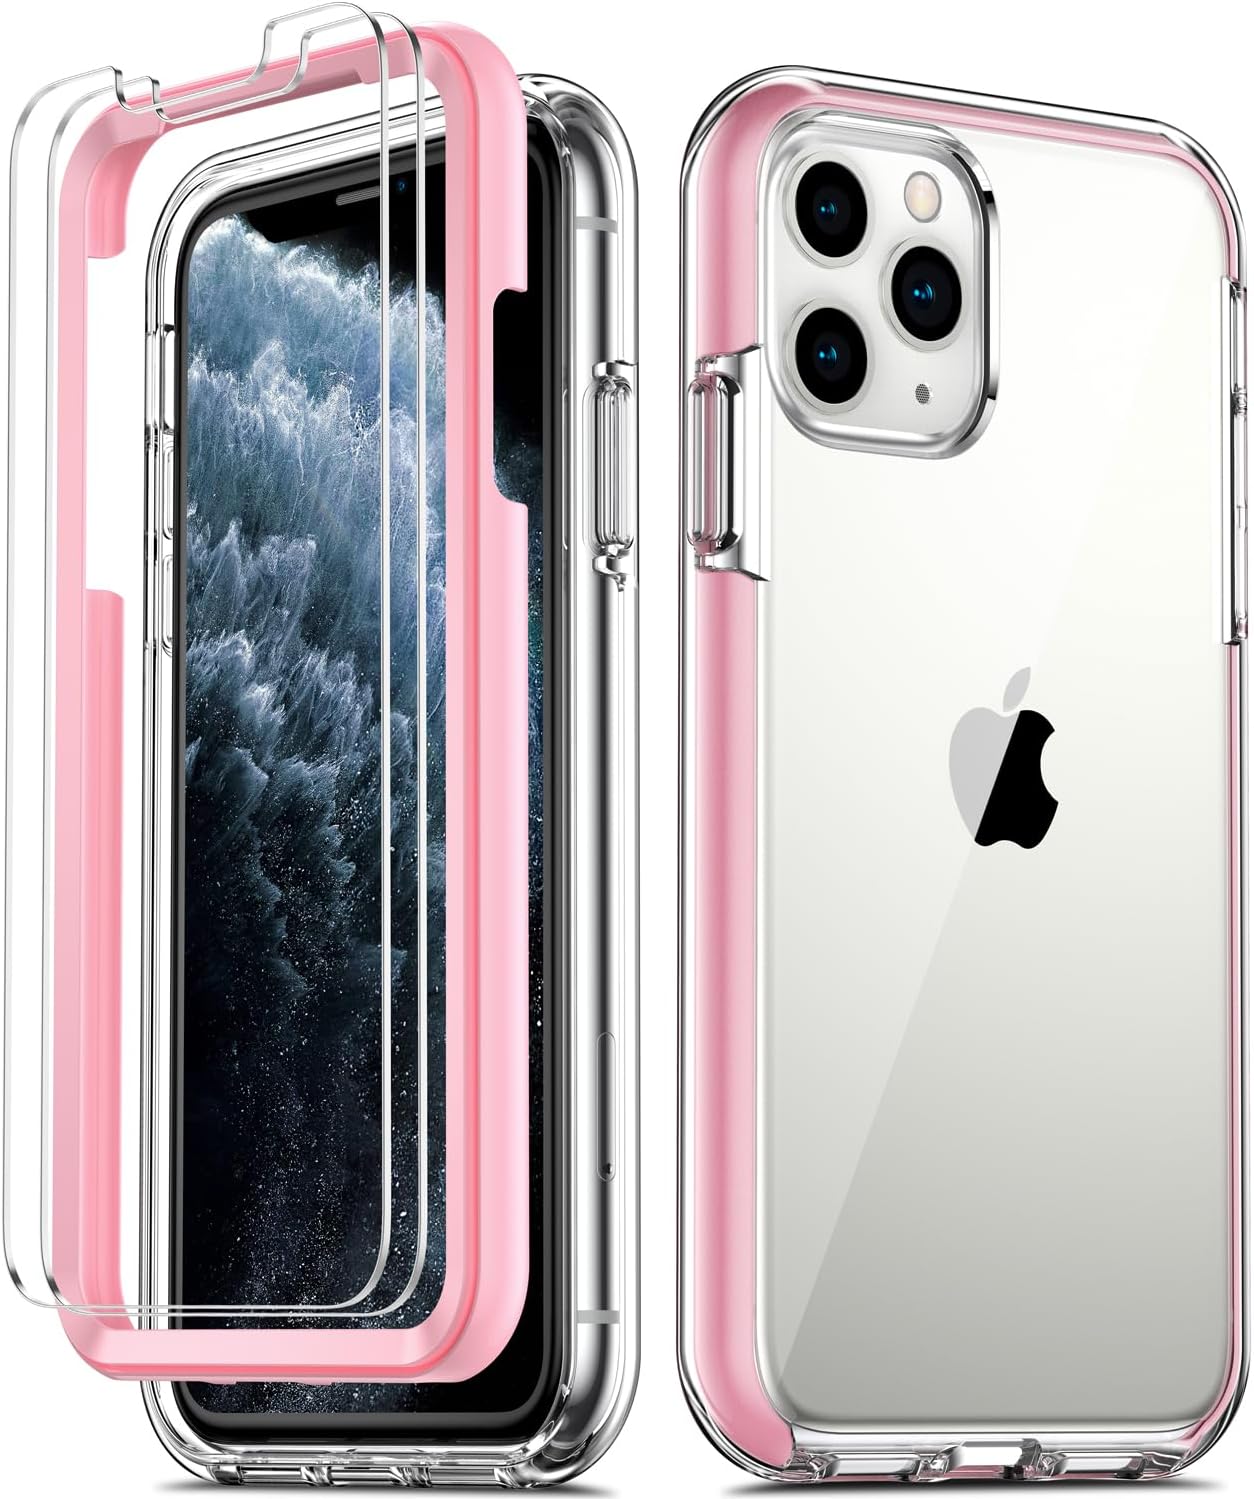 iPhone 11 Pro Case with x 2 Tempered Glass Screen Protector